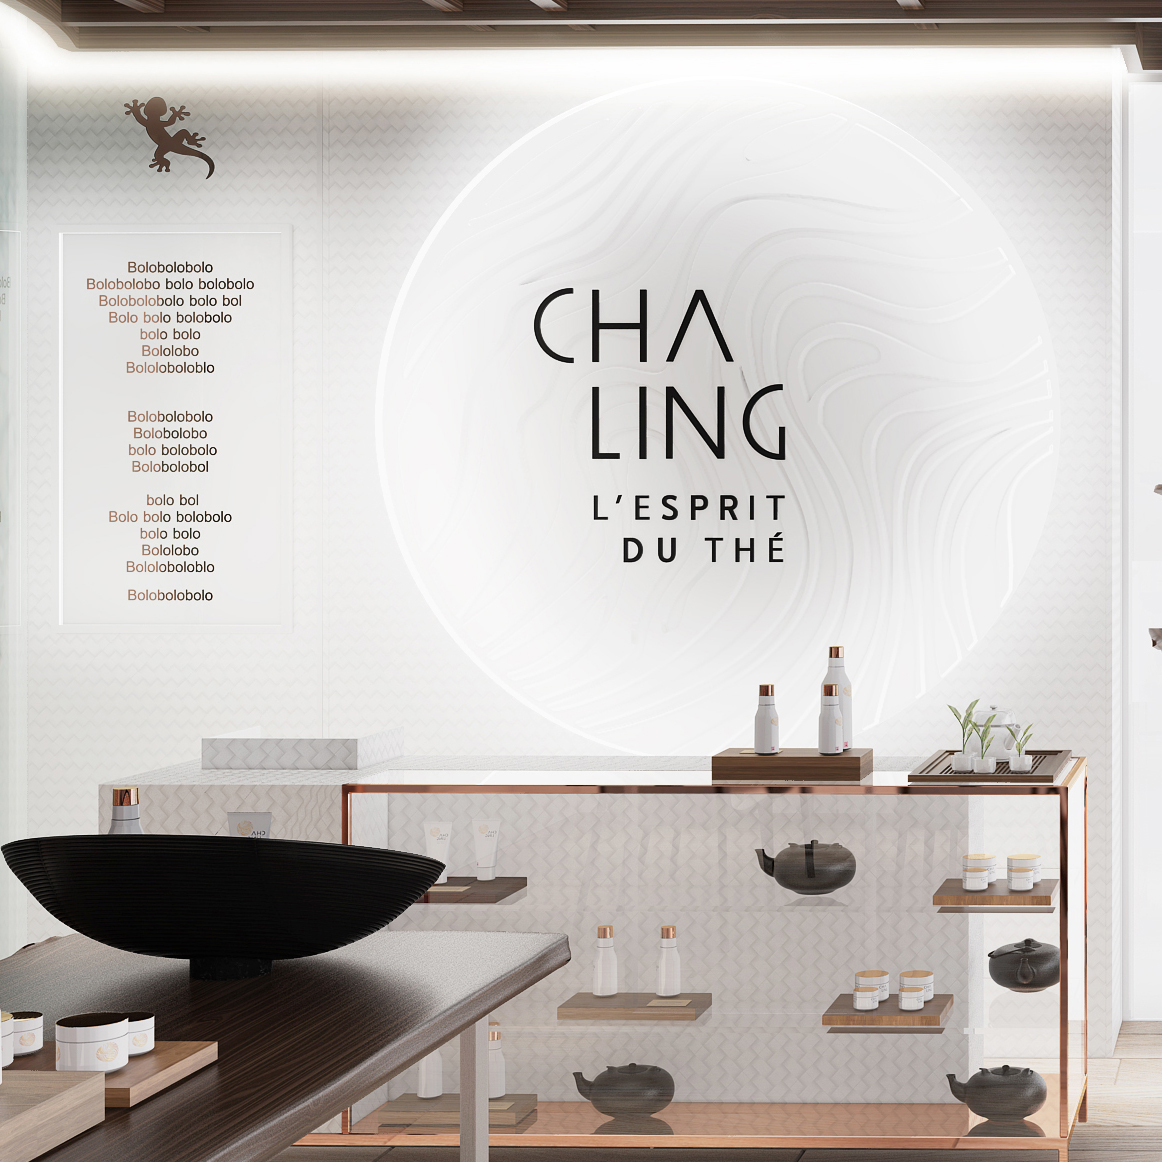 Phil Design - Interior Design and Production Management - Cha Ling Project